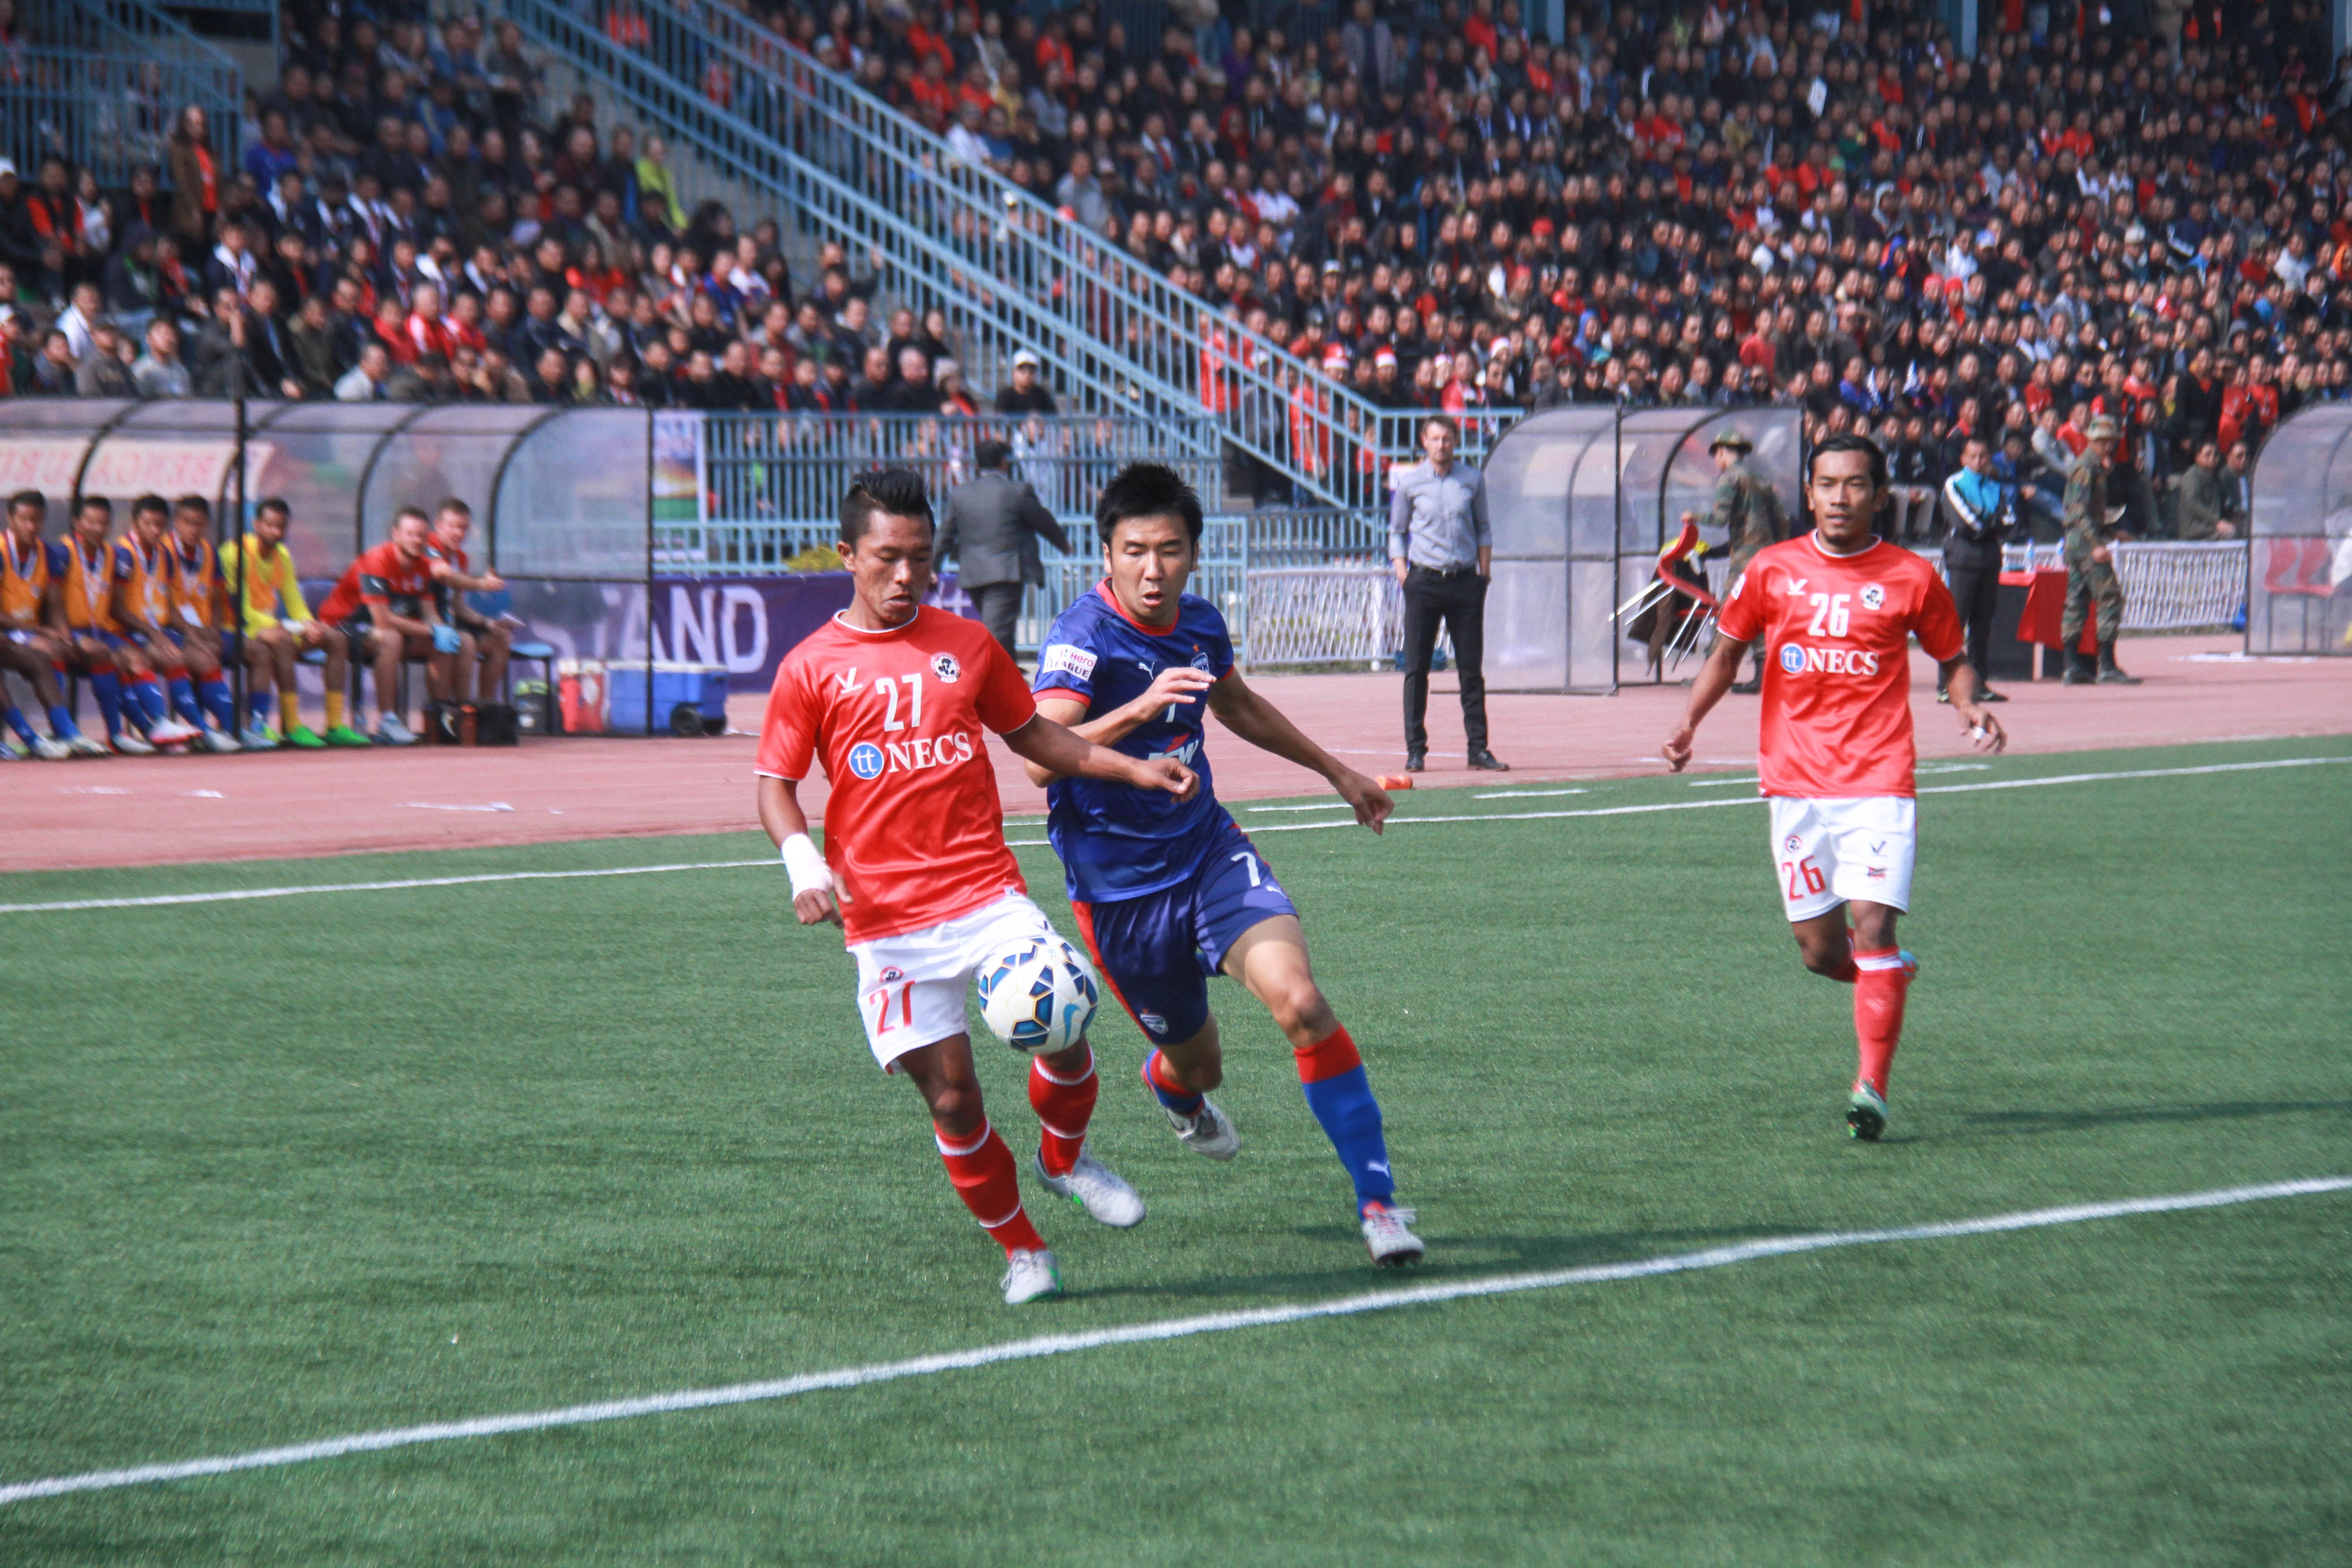 Federation Cup: Sunday strikes a day early in Aizawl to leave Bengaluru shell shocked